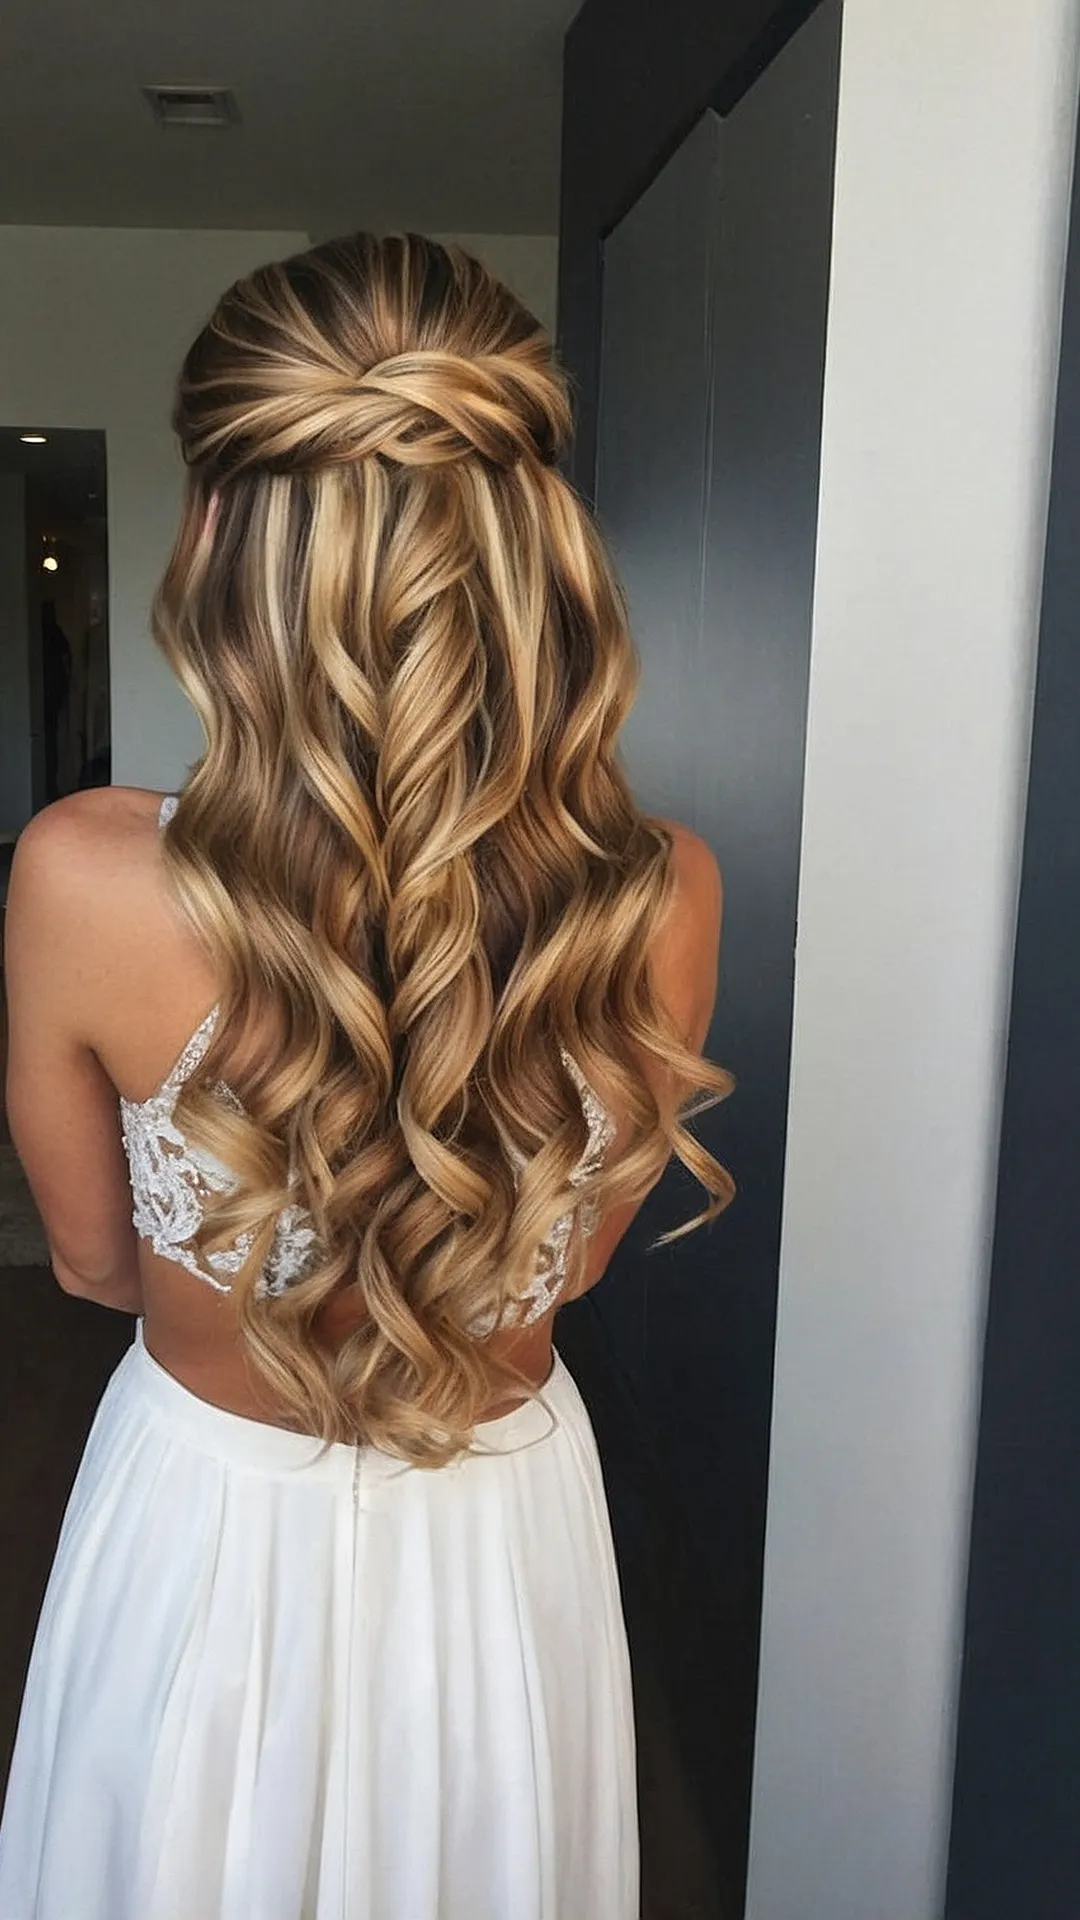 Whimsical Waves: Cute Prom Hair Inspiration